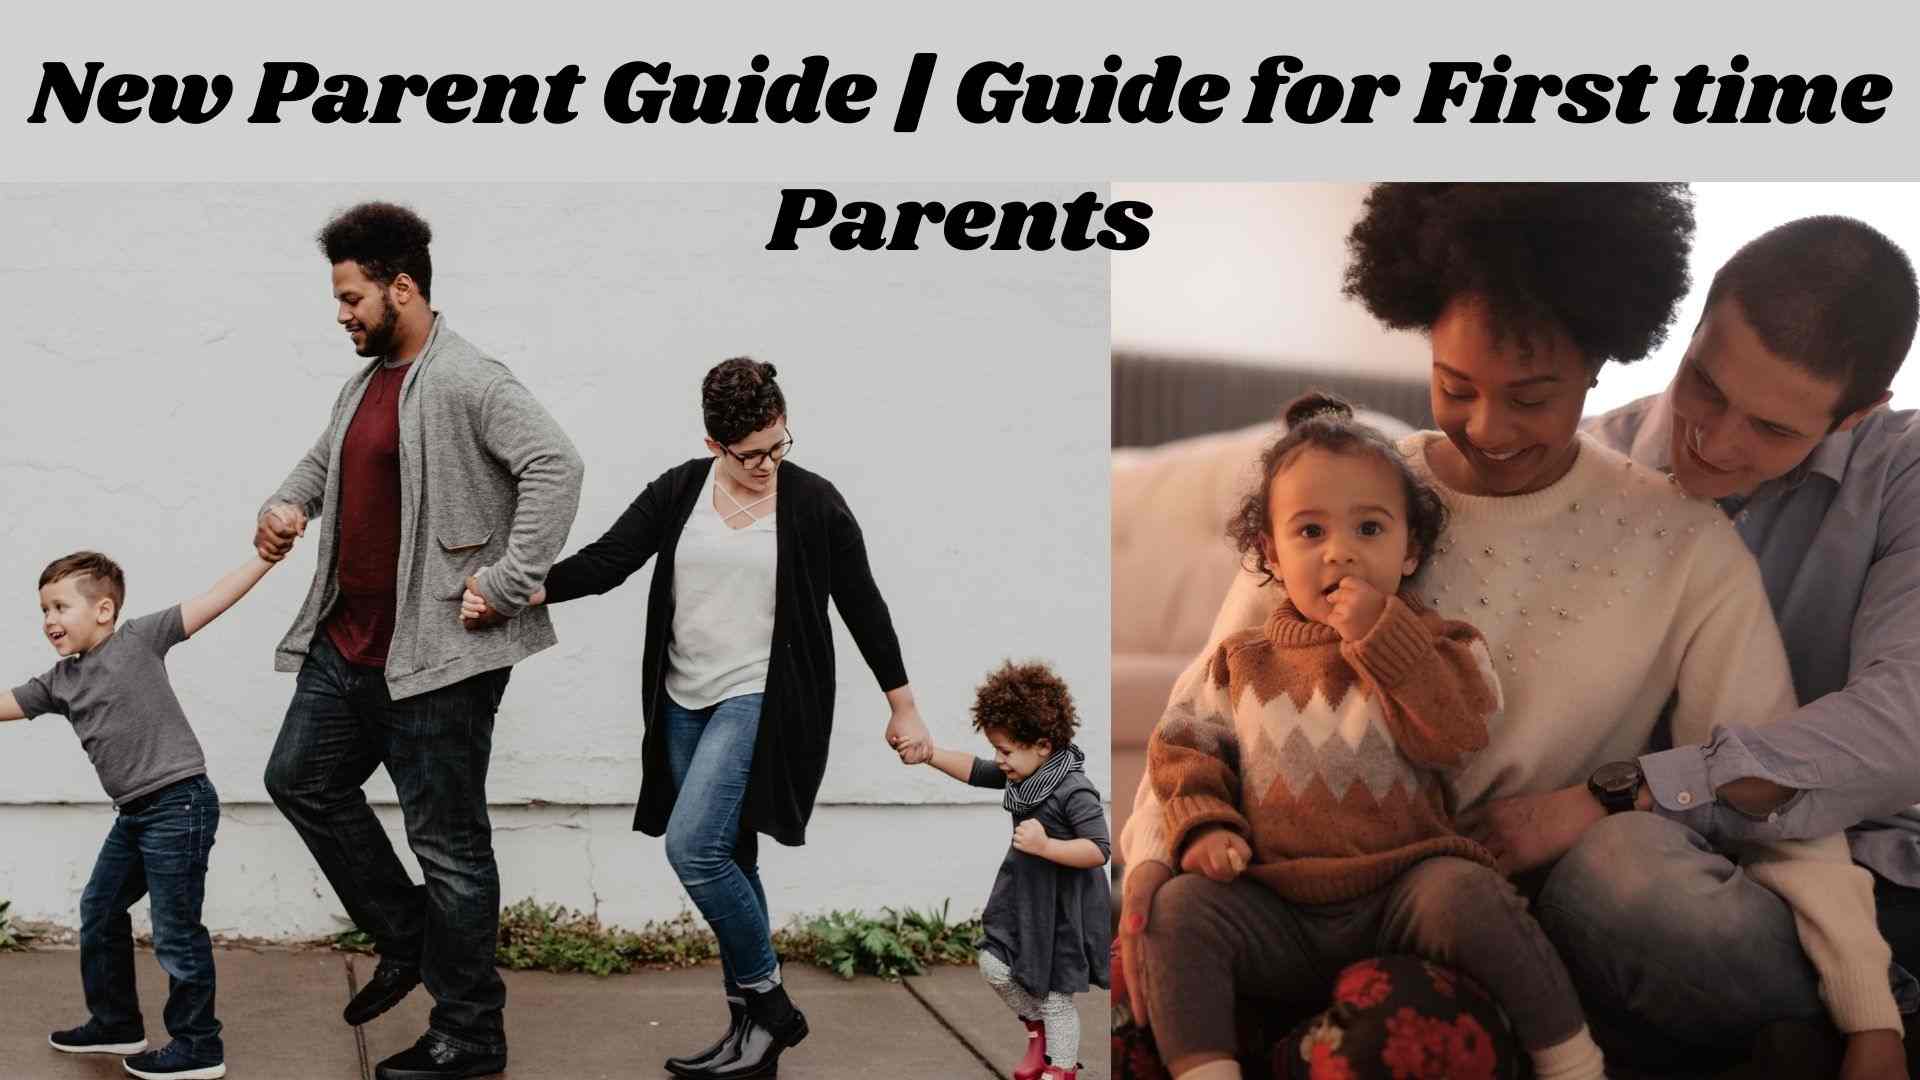 New Parent Guide | Guide for First time Parents wallpaper and images